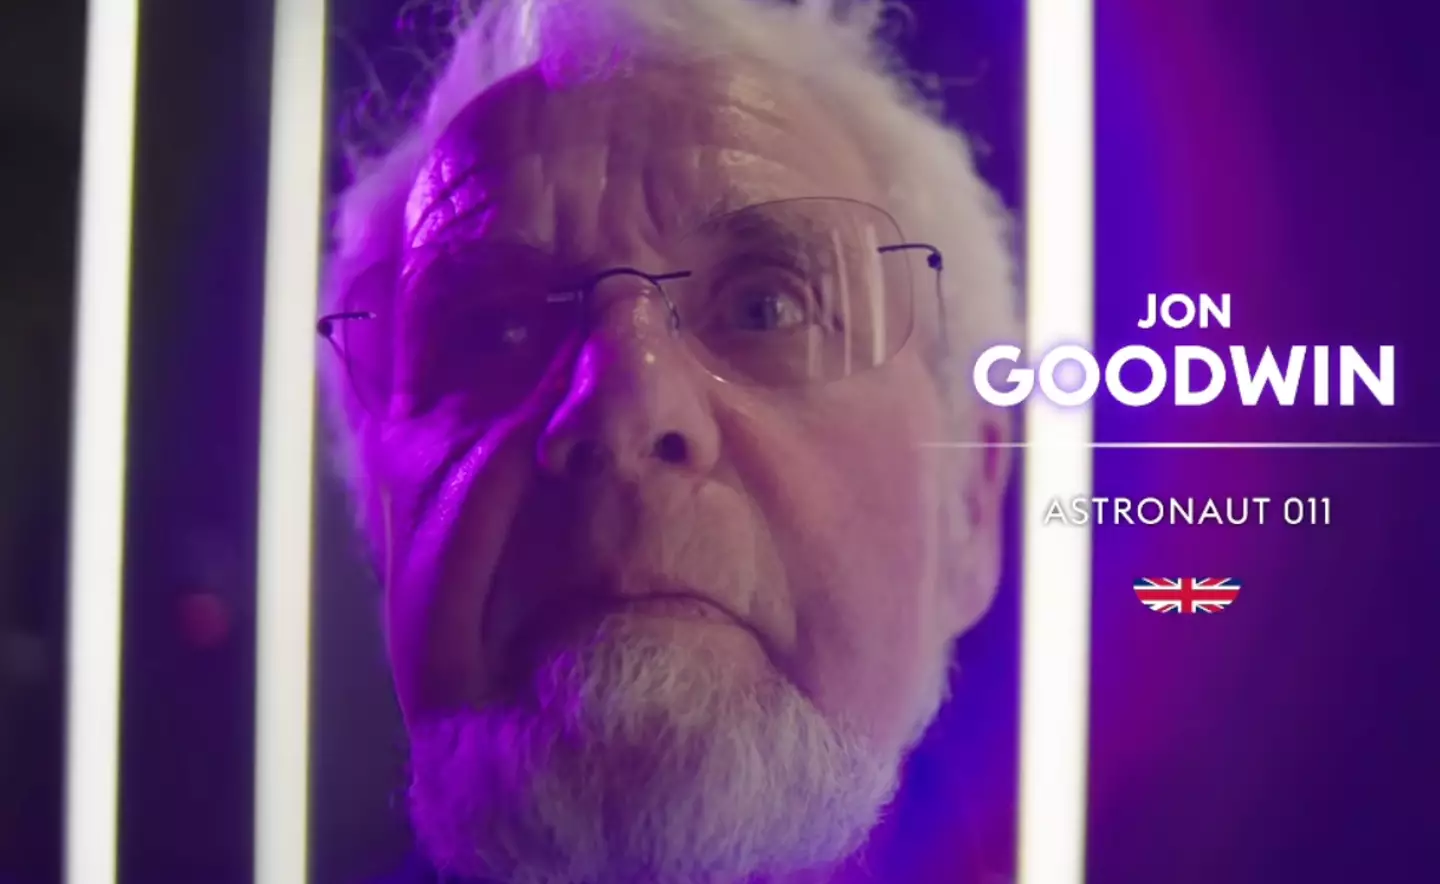 Jon Goodwin is the second person with Alzheimer's to make the trip to space.